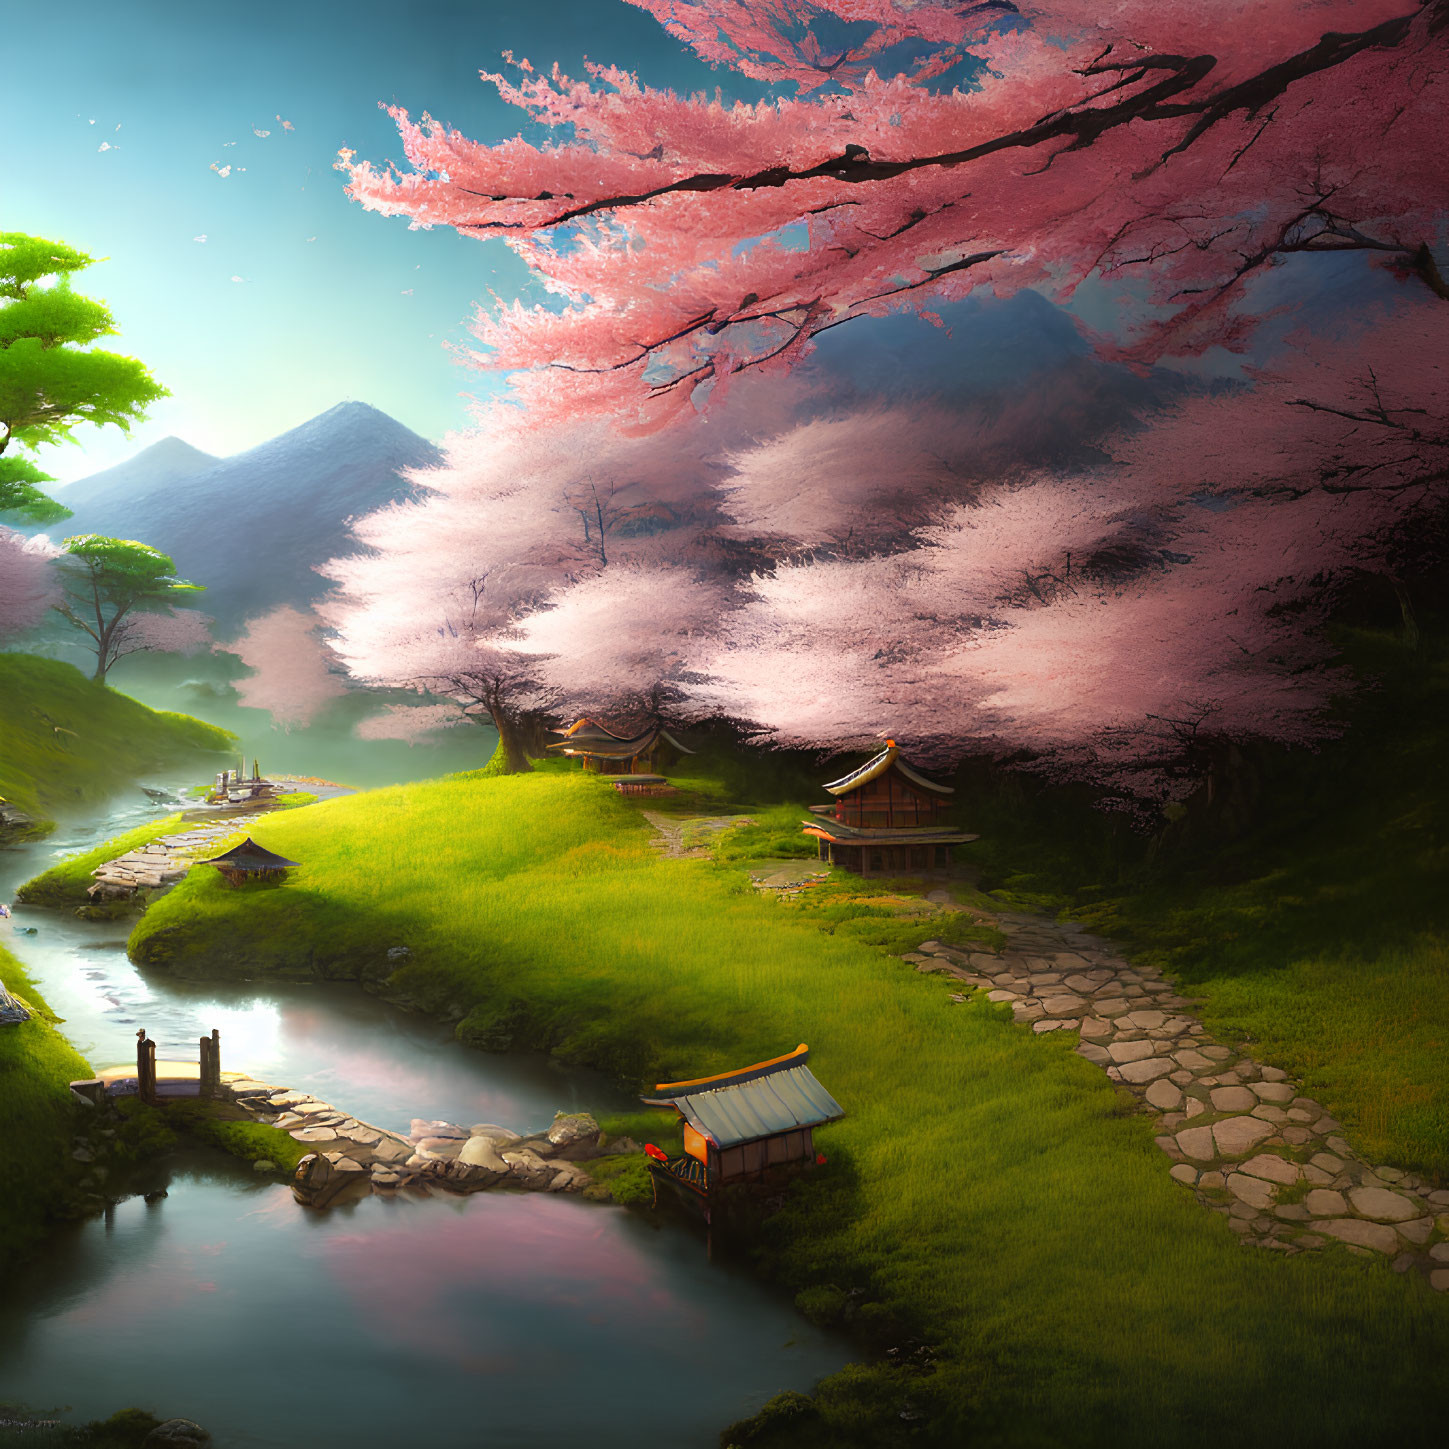 Tranquil landscape with cherry blossoms, stream, traditional houses, and mountains